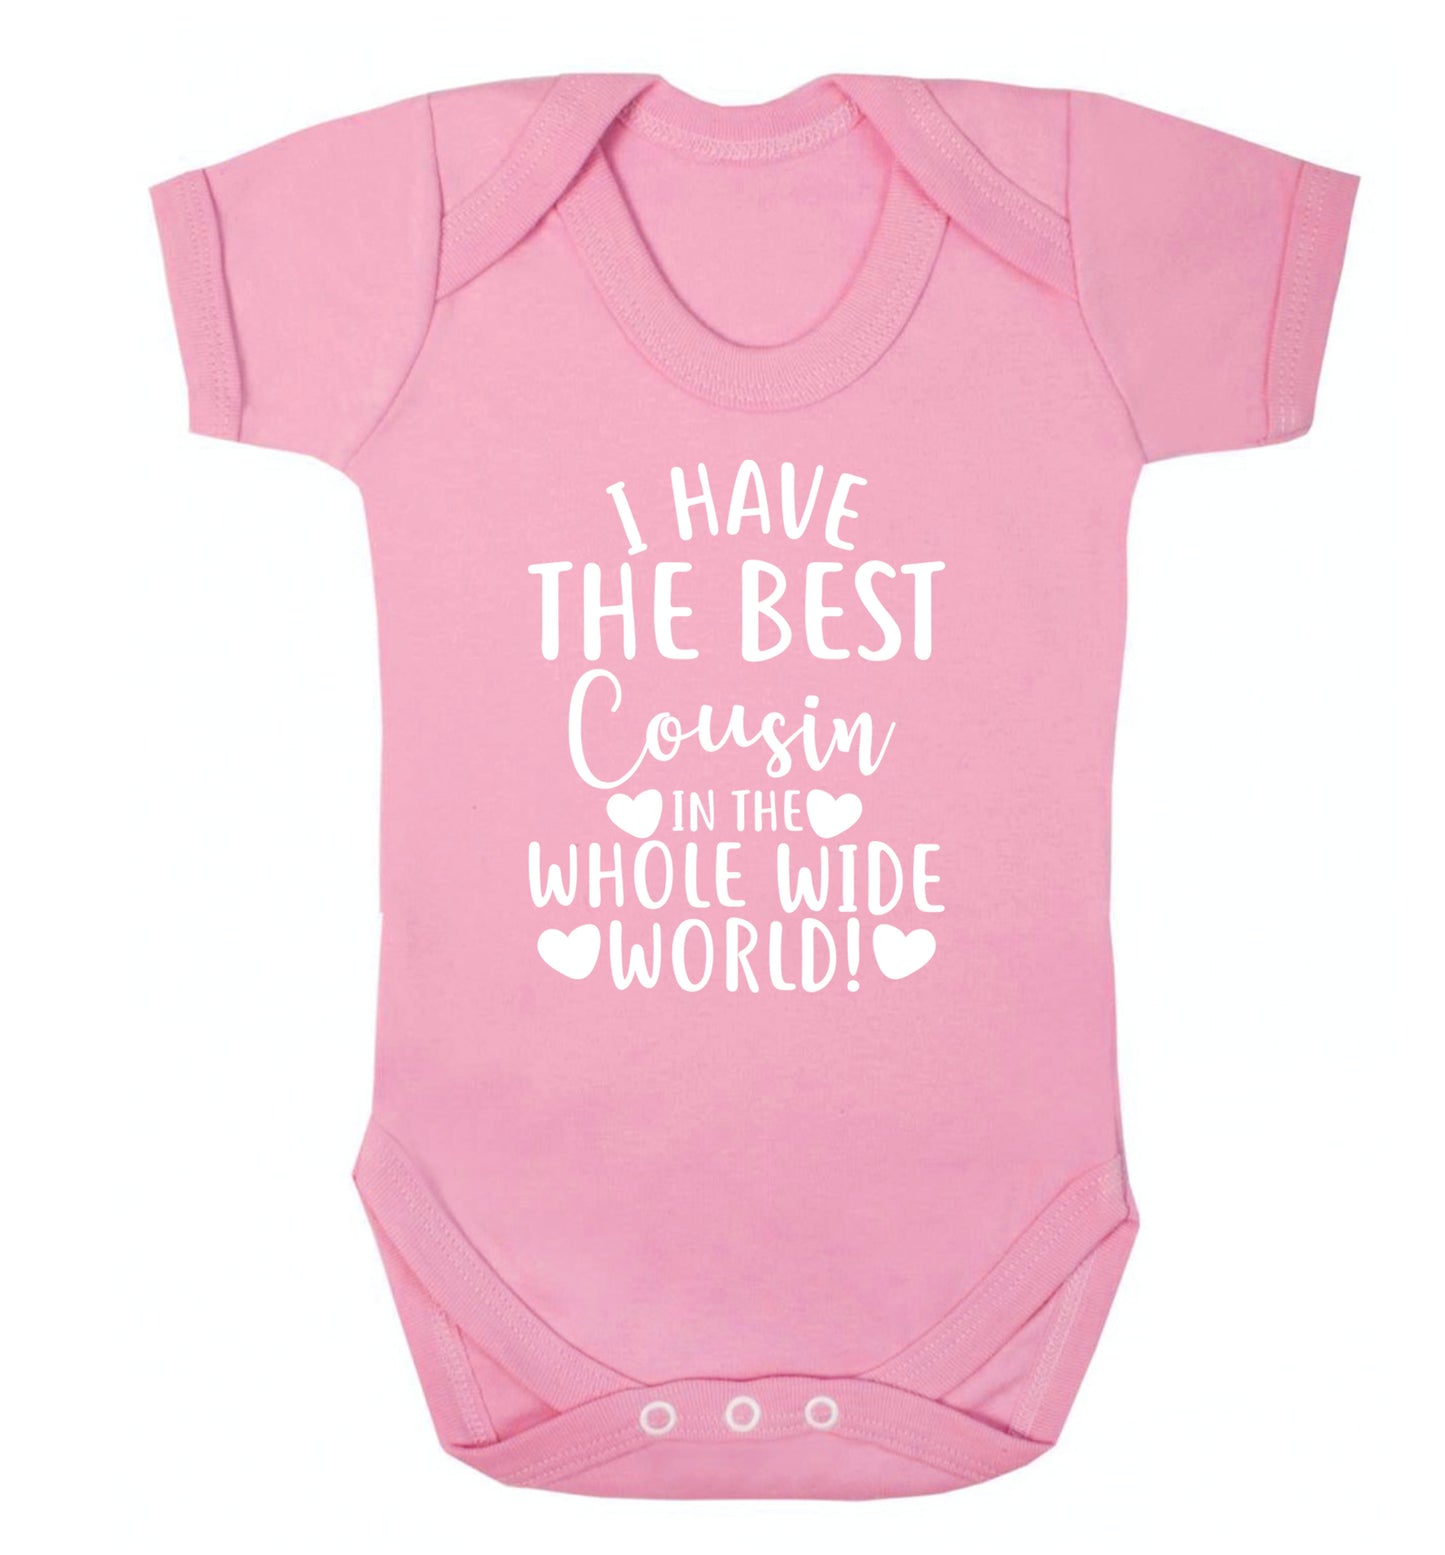 I have the best cousin in the whole wide world! Baby Vest pale pink 18-24 months